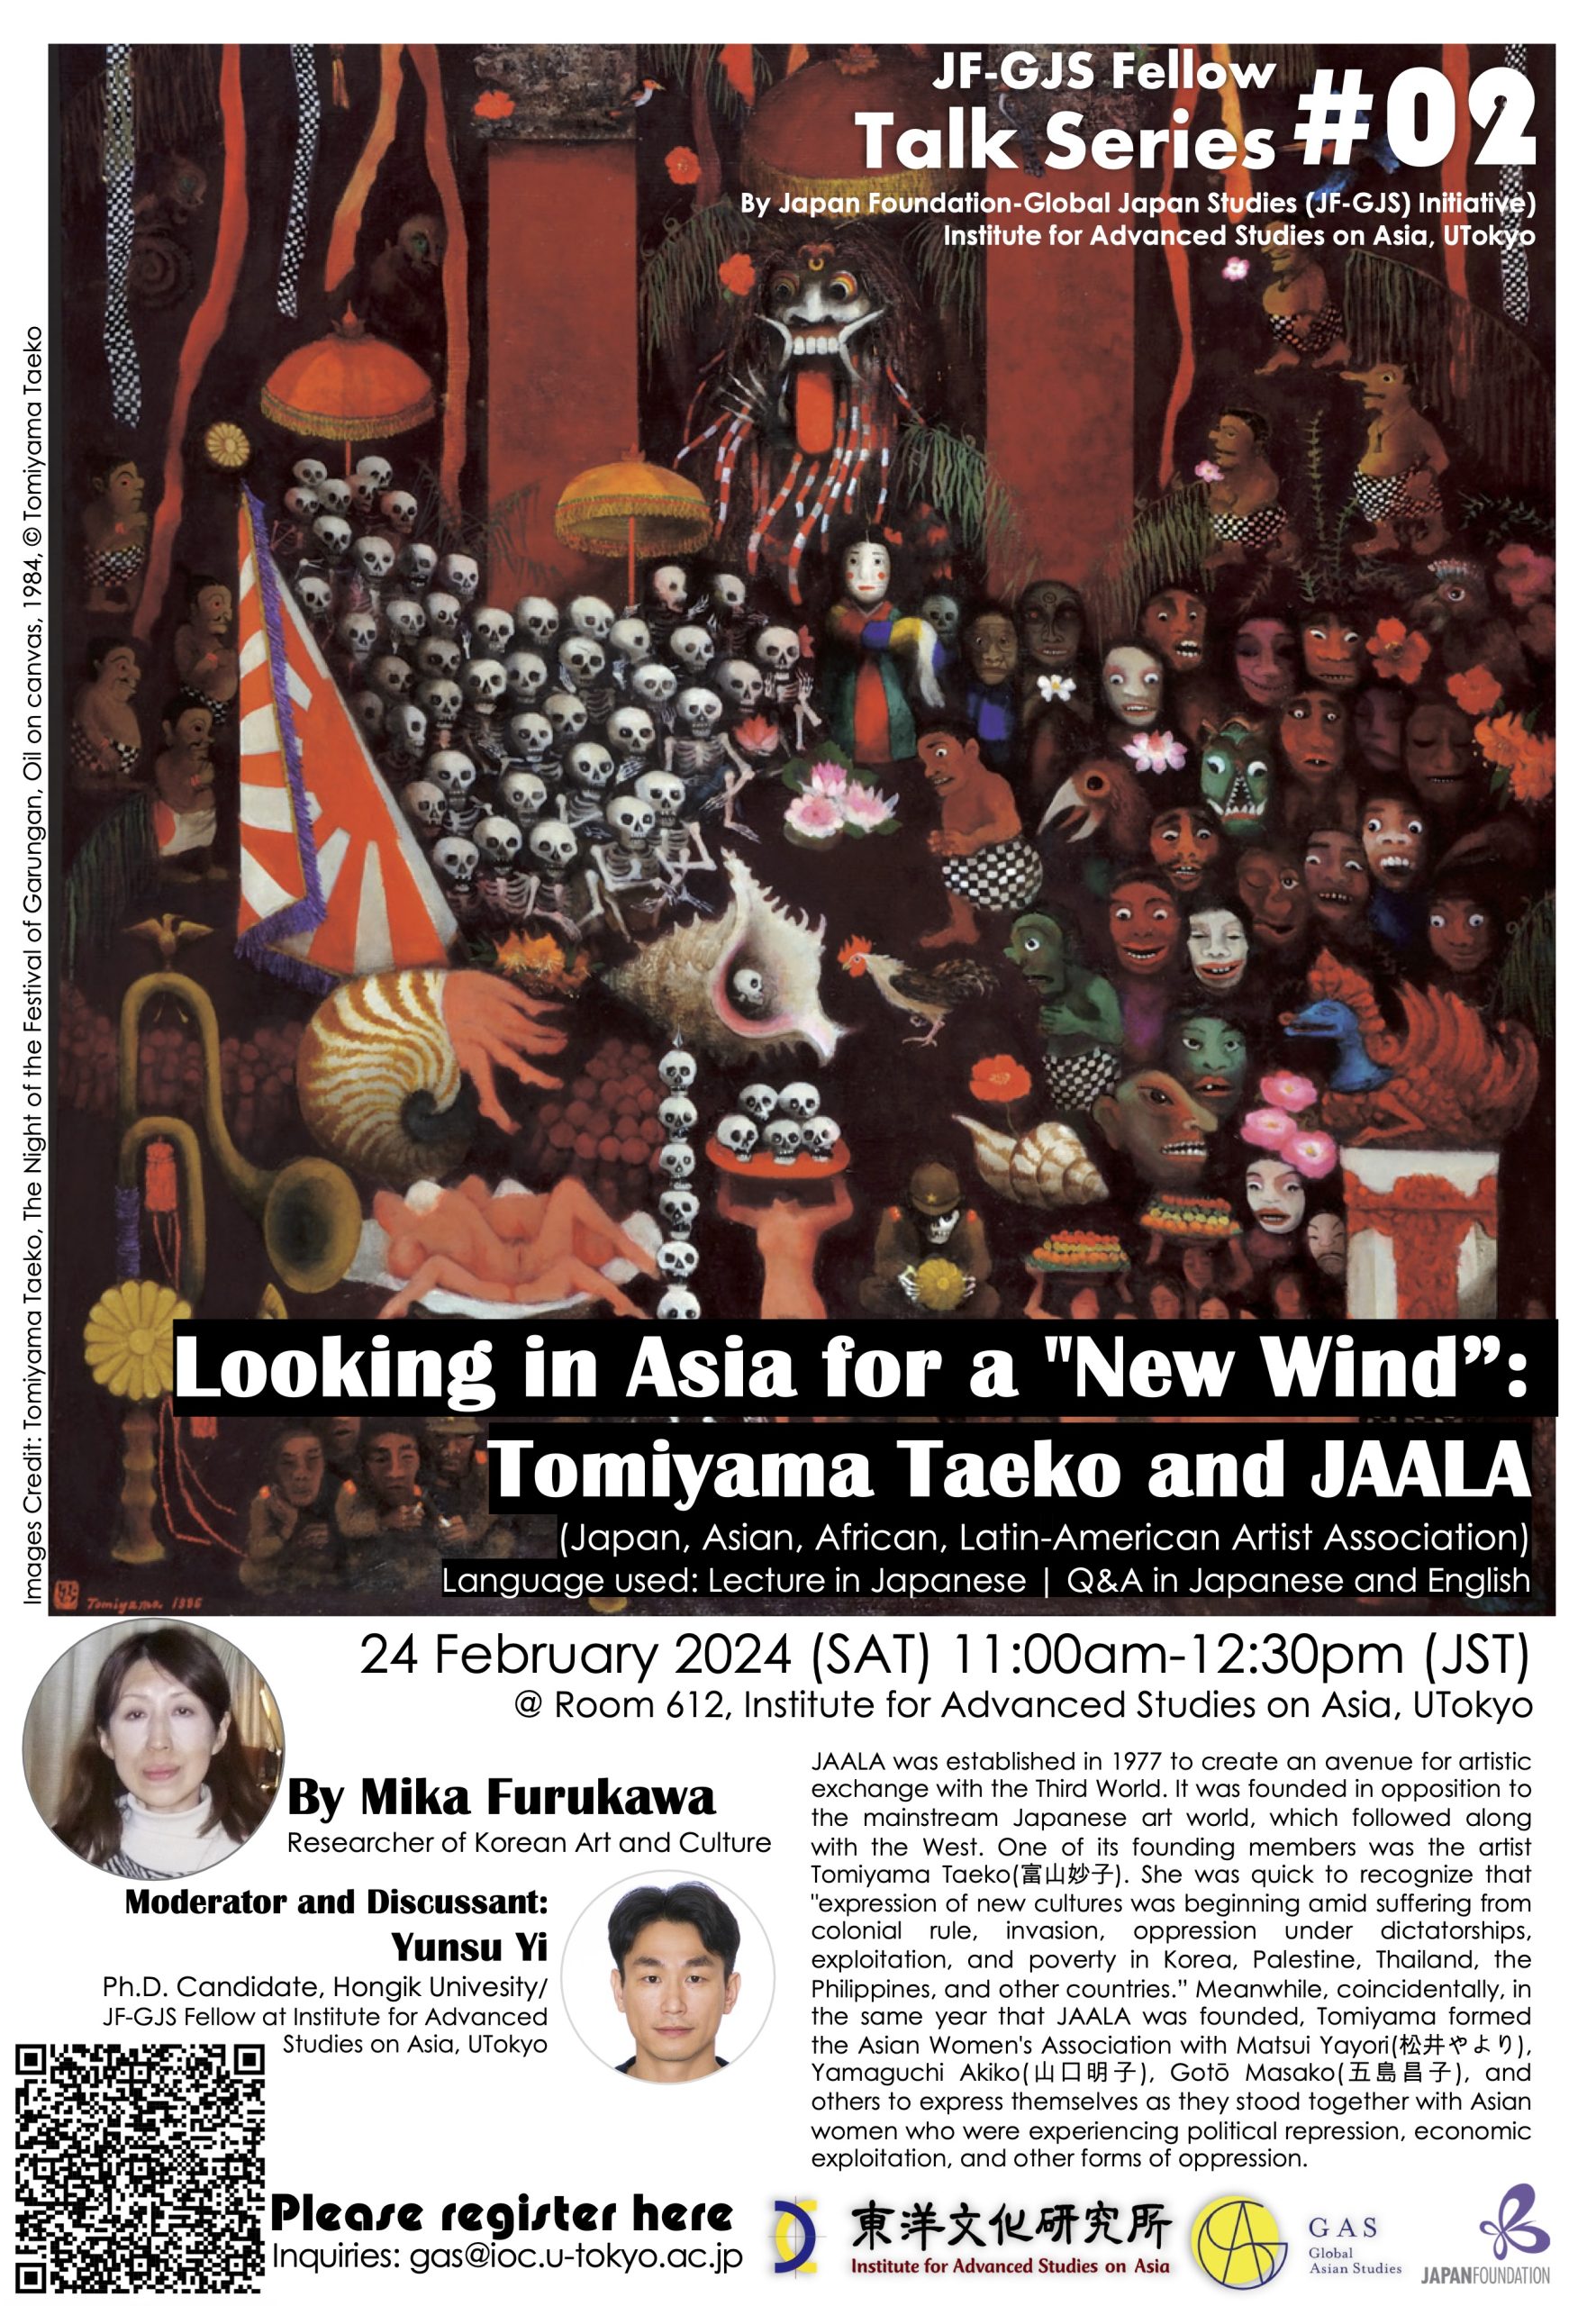 Looking in Asia for a “New Wind”: Tomiyama Taeko and JAALA (Japan, Asian, African, Latin-American Artist Association)